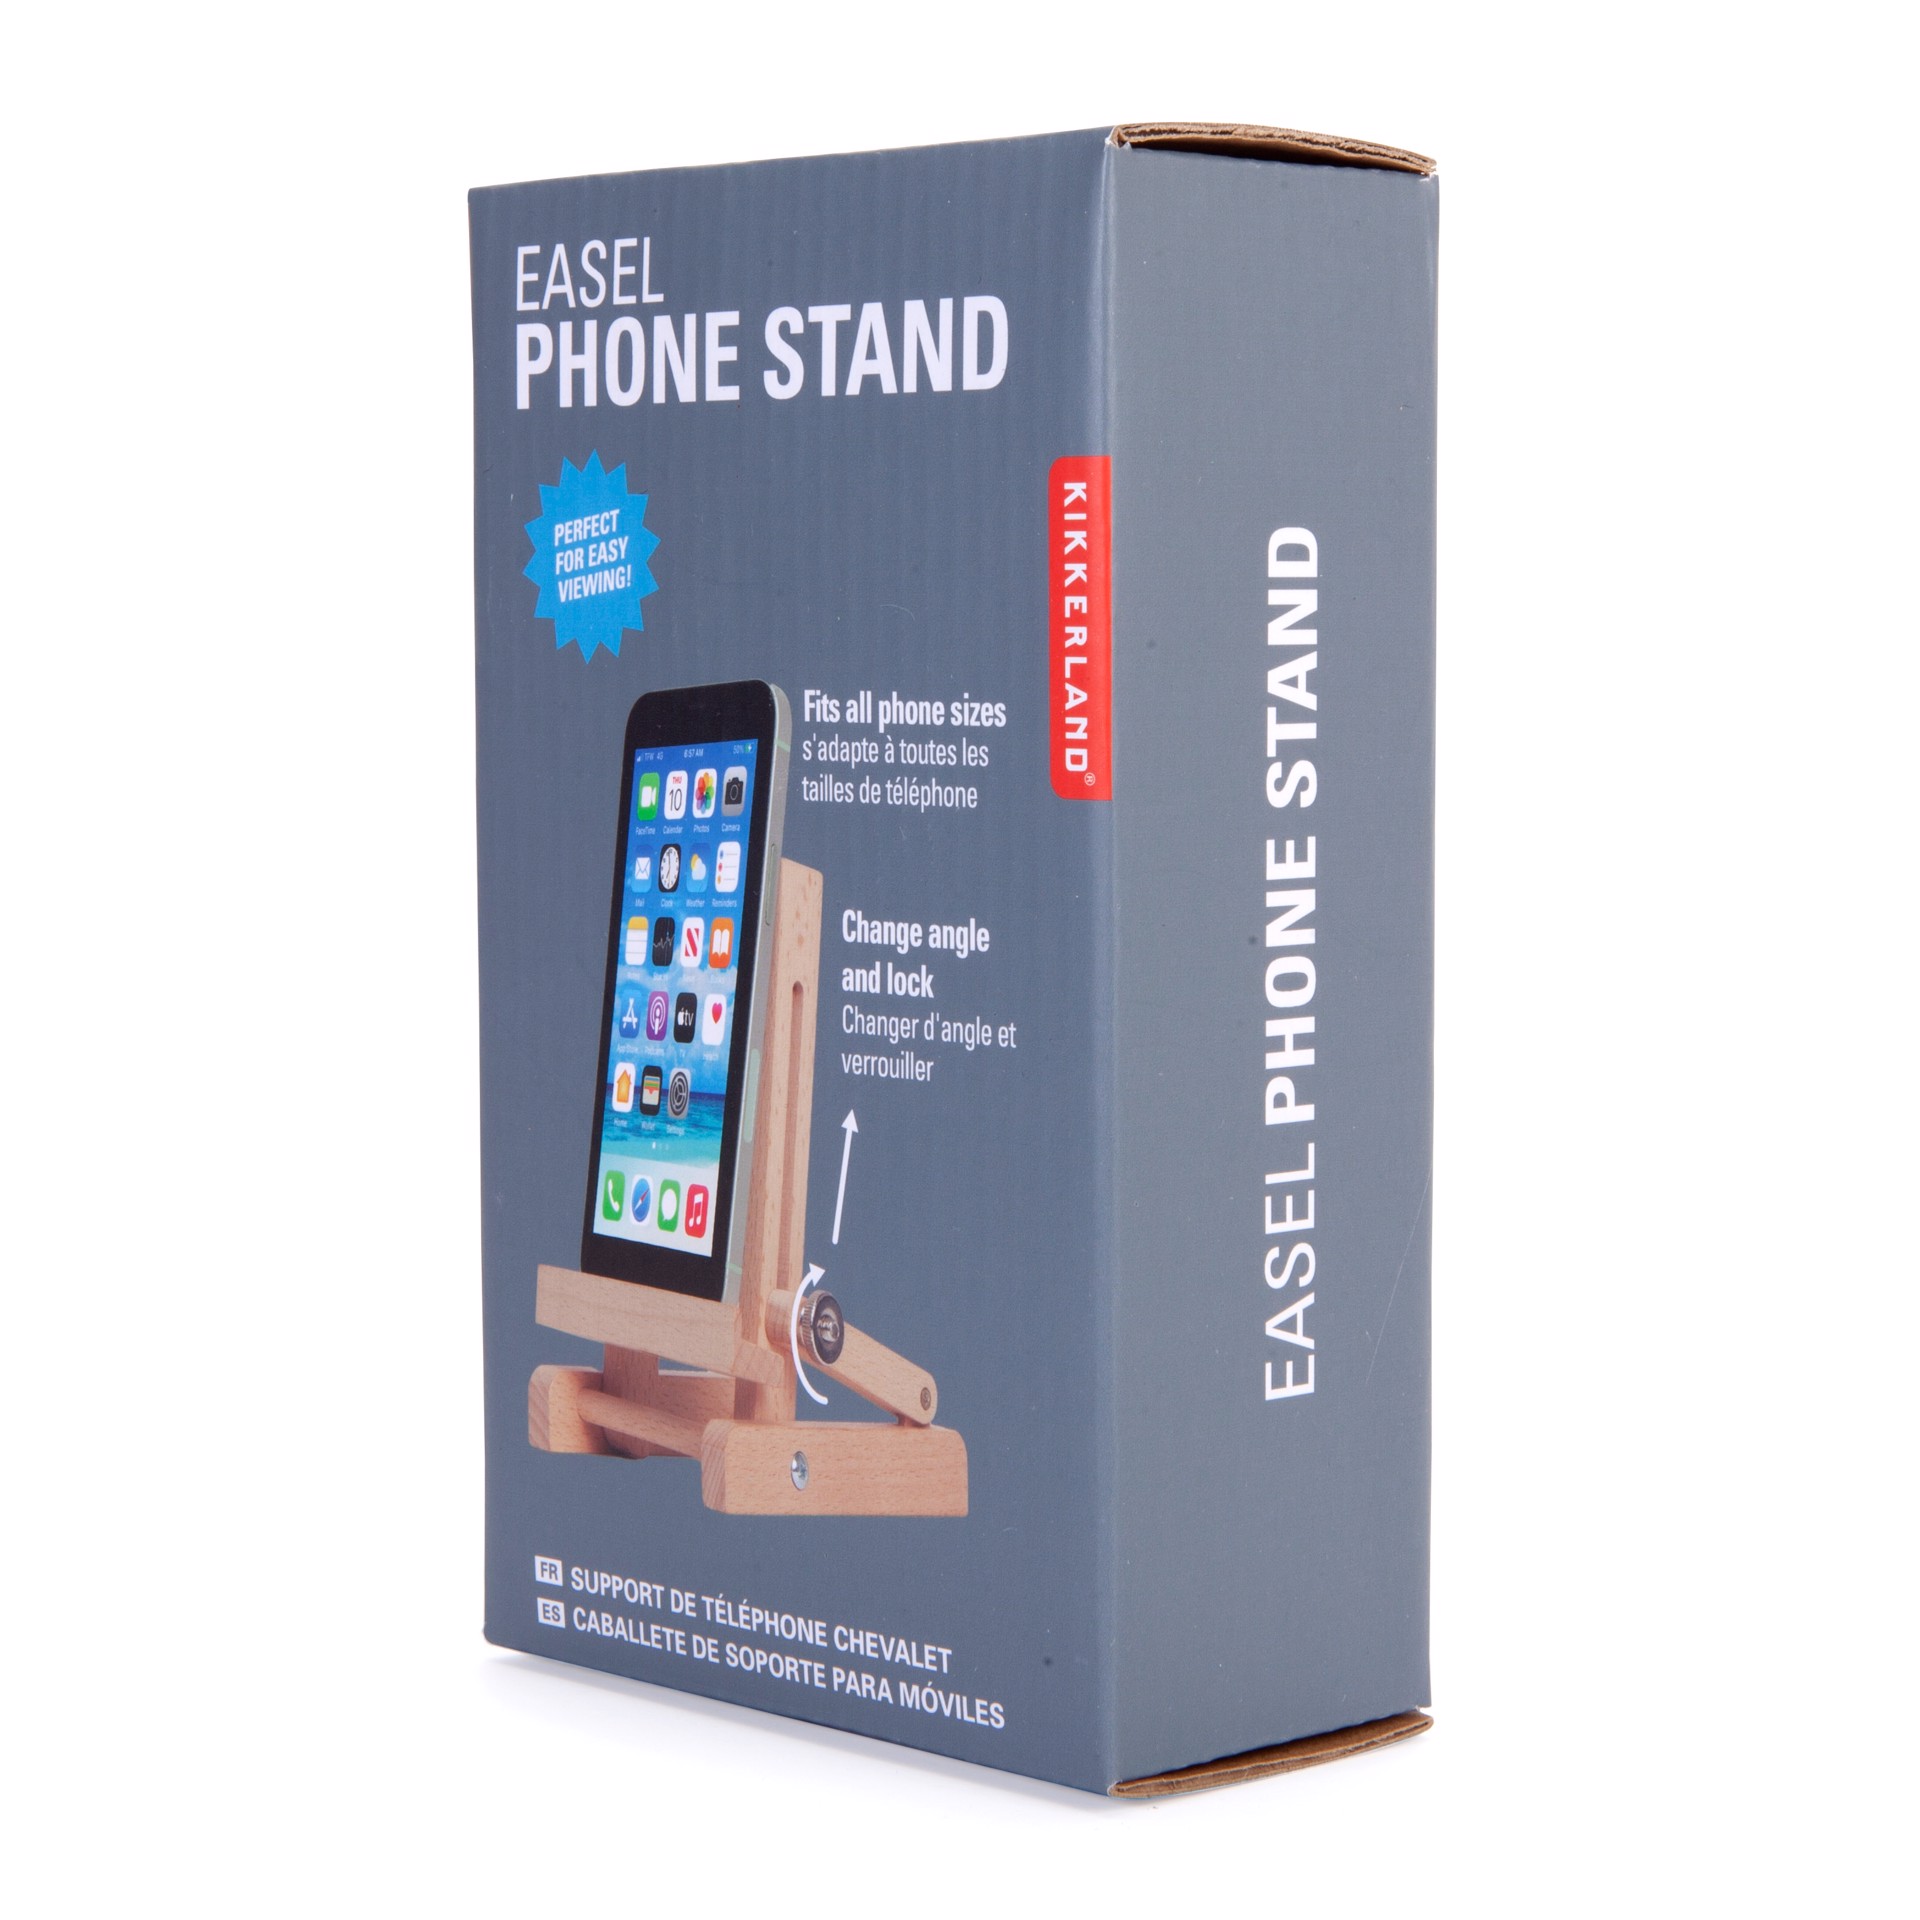 Easel Phone Stand by Chauvet Arts